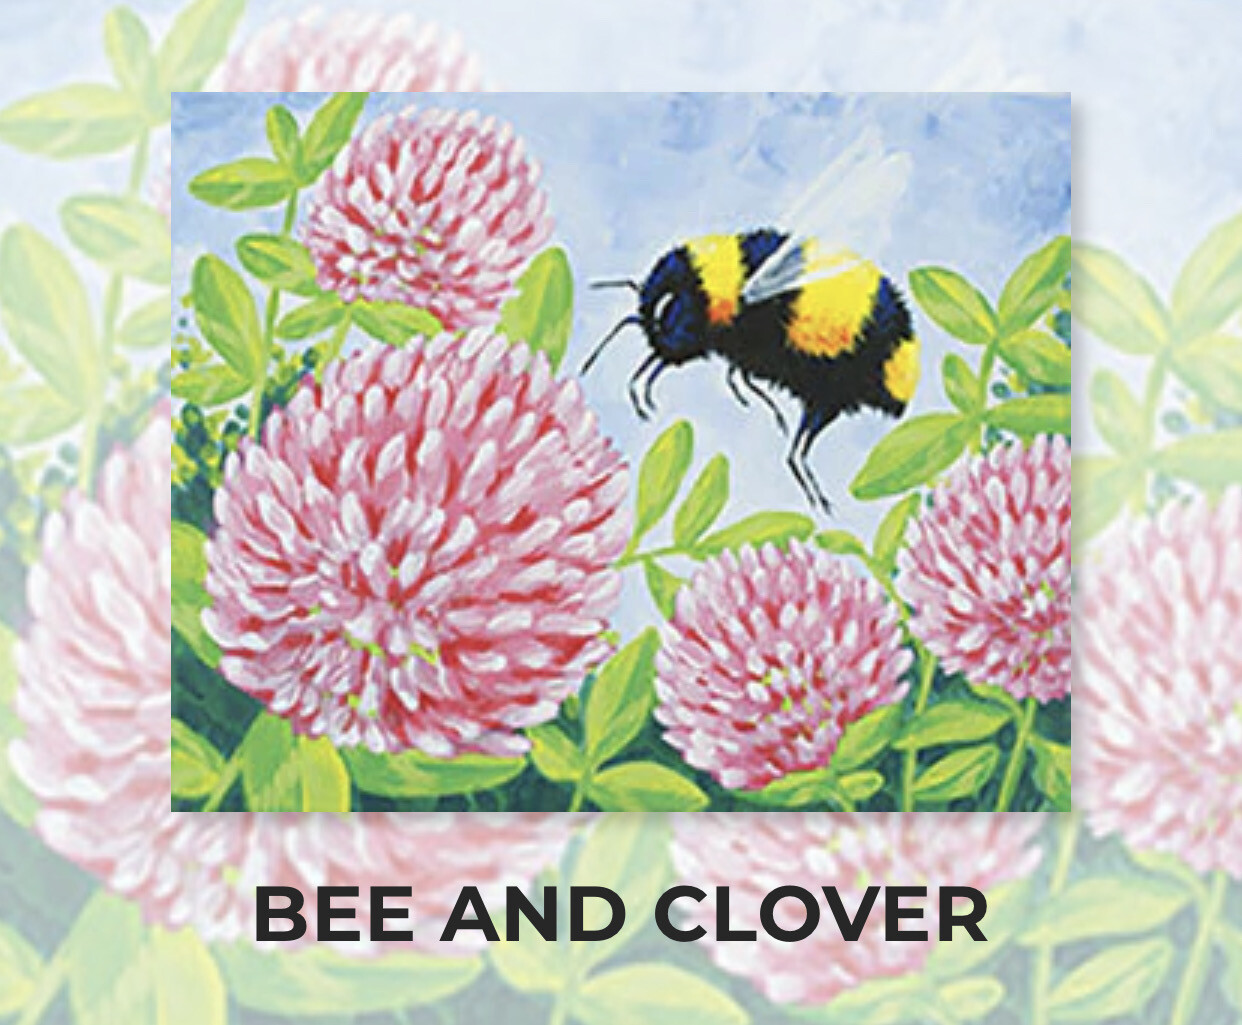 Bee And Clover ADULT Acrylic Paint On Canvas DIY Art Kit - 3 Week Special Order